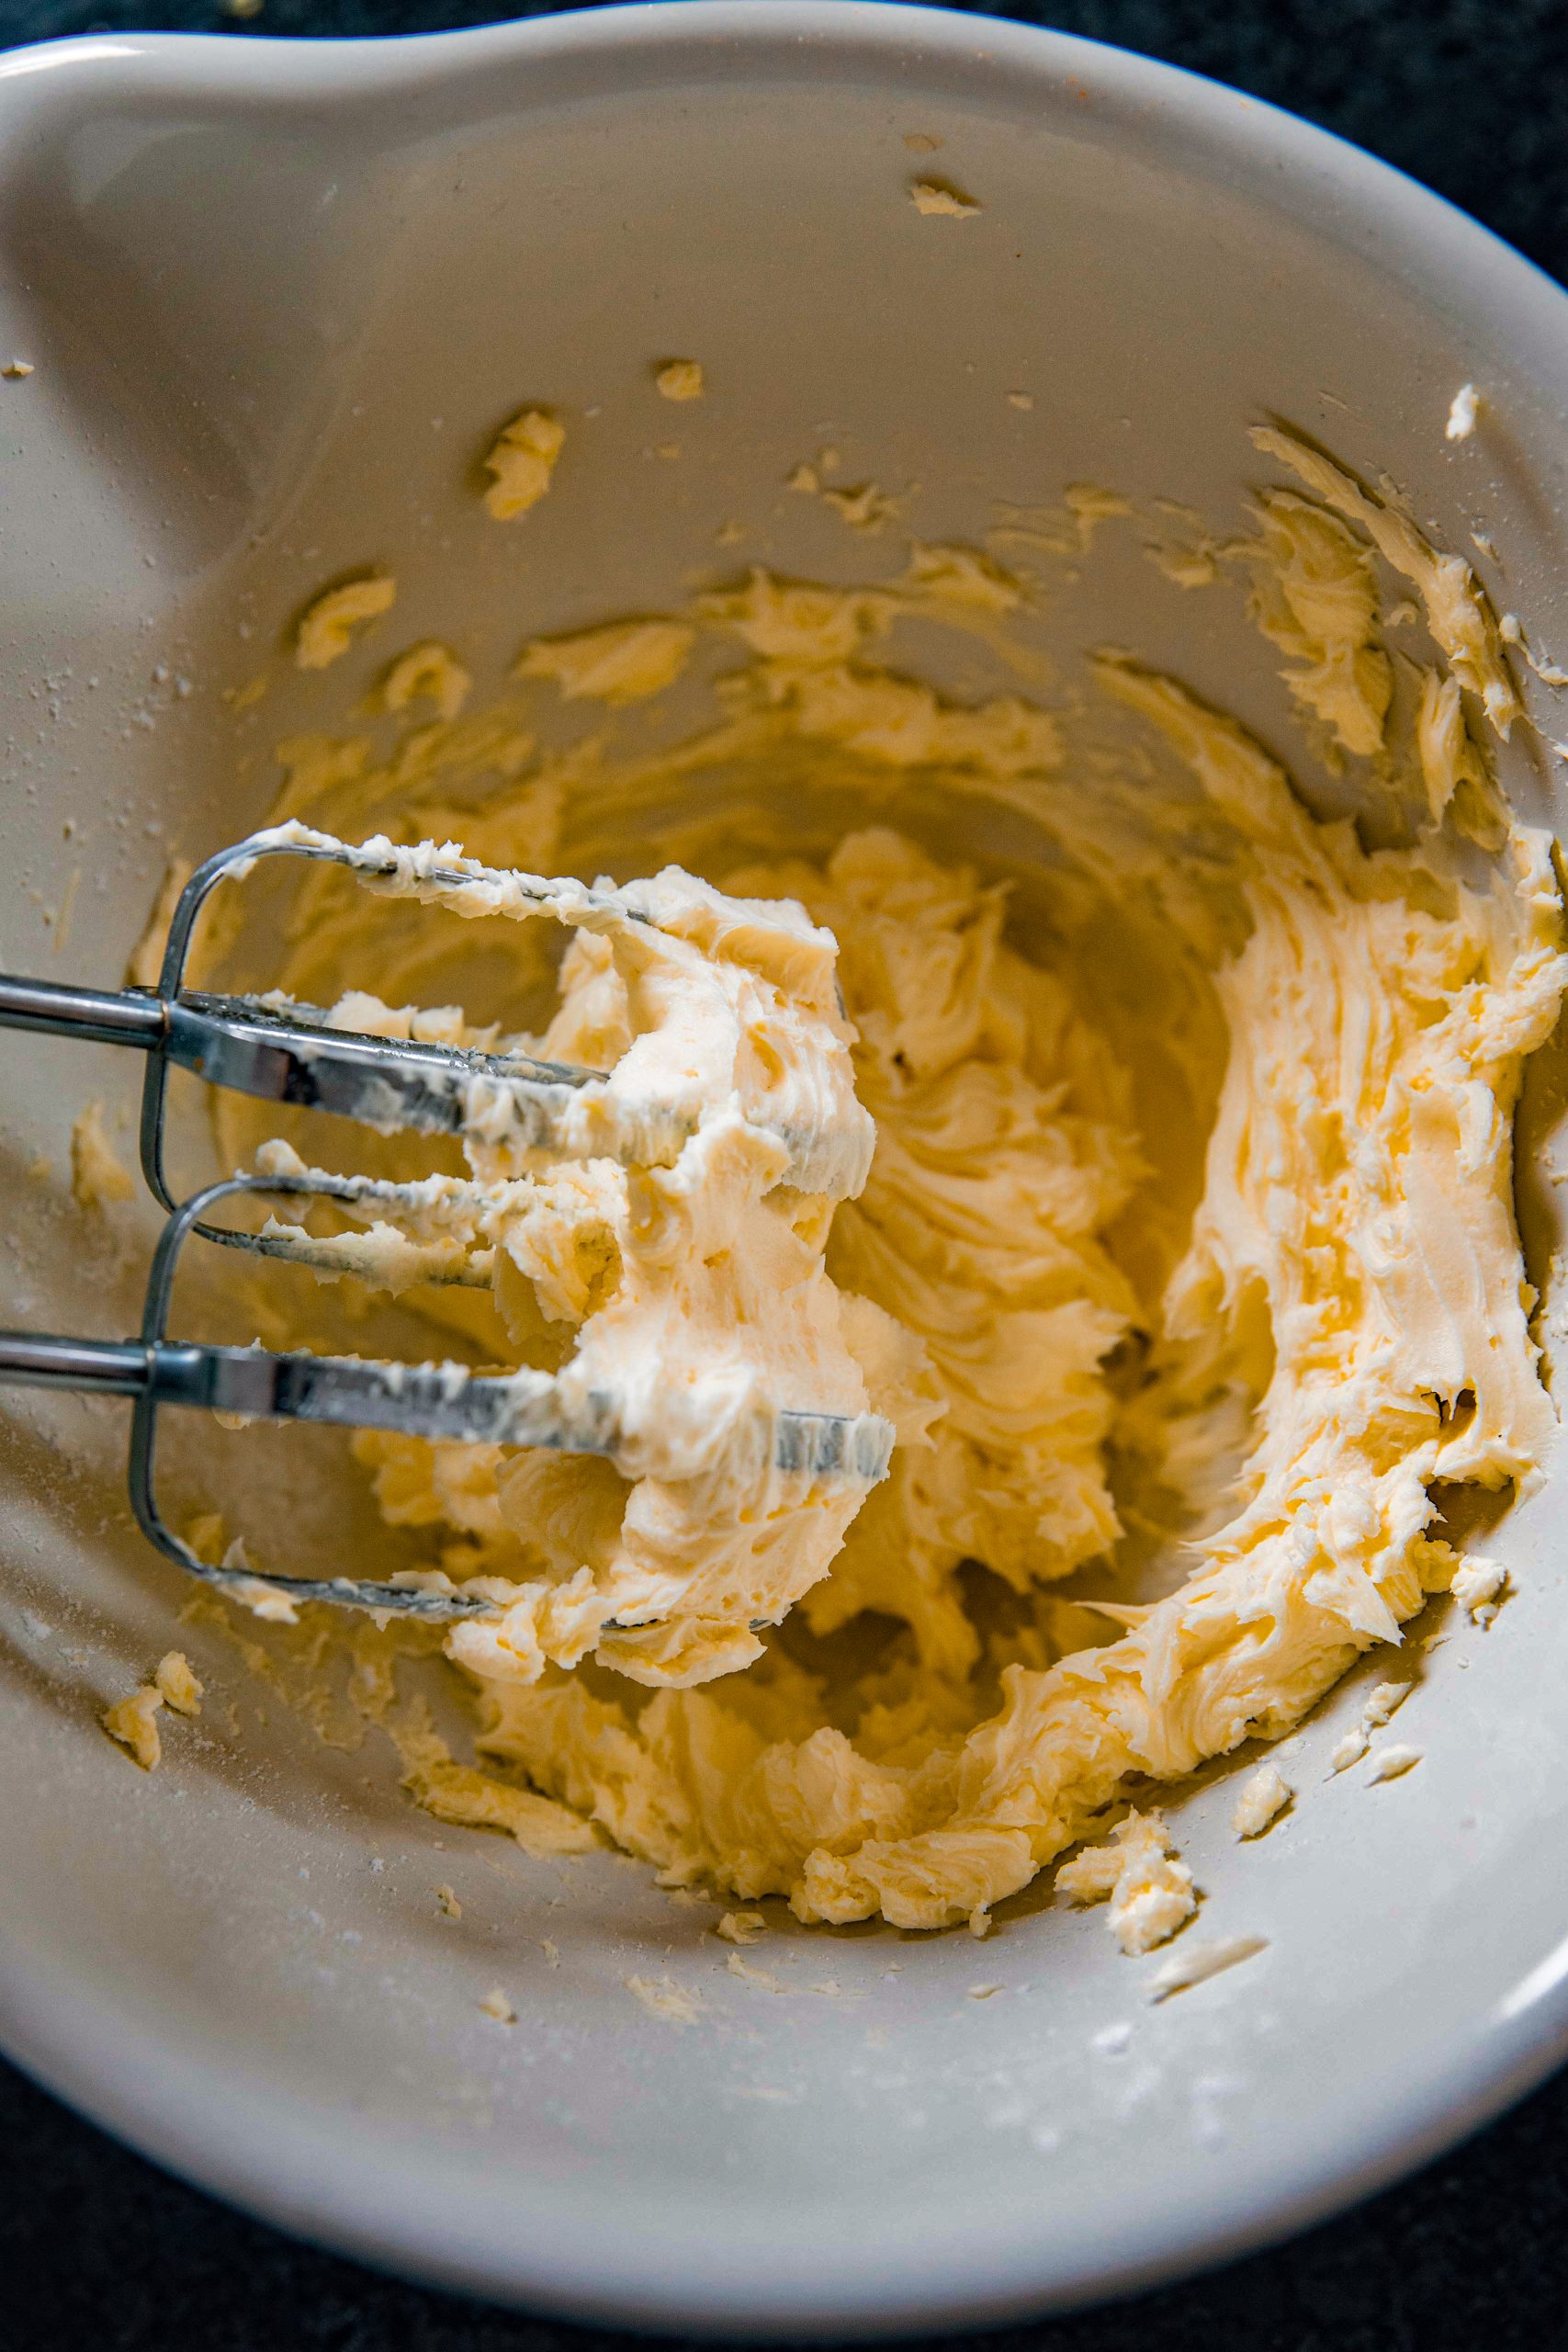 Beat cream cheese and confectioners' sugar together until smooth. Gently fold in whipped cream and lemon juice.